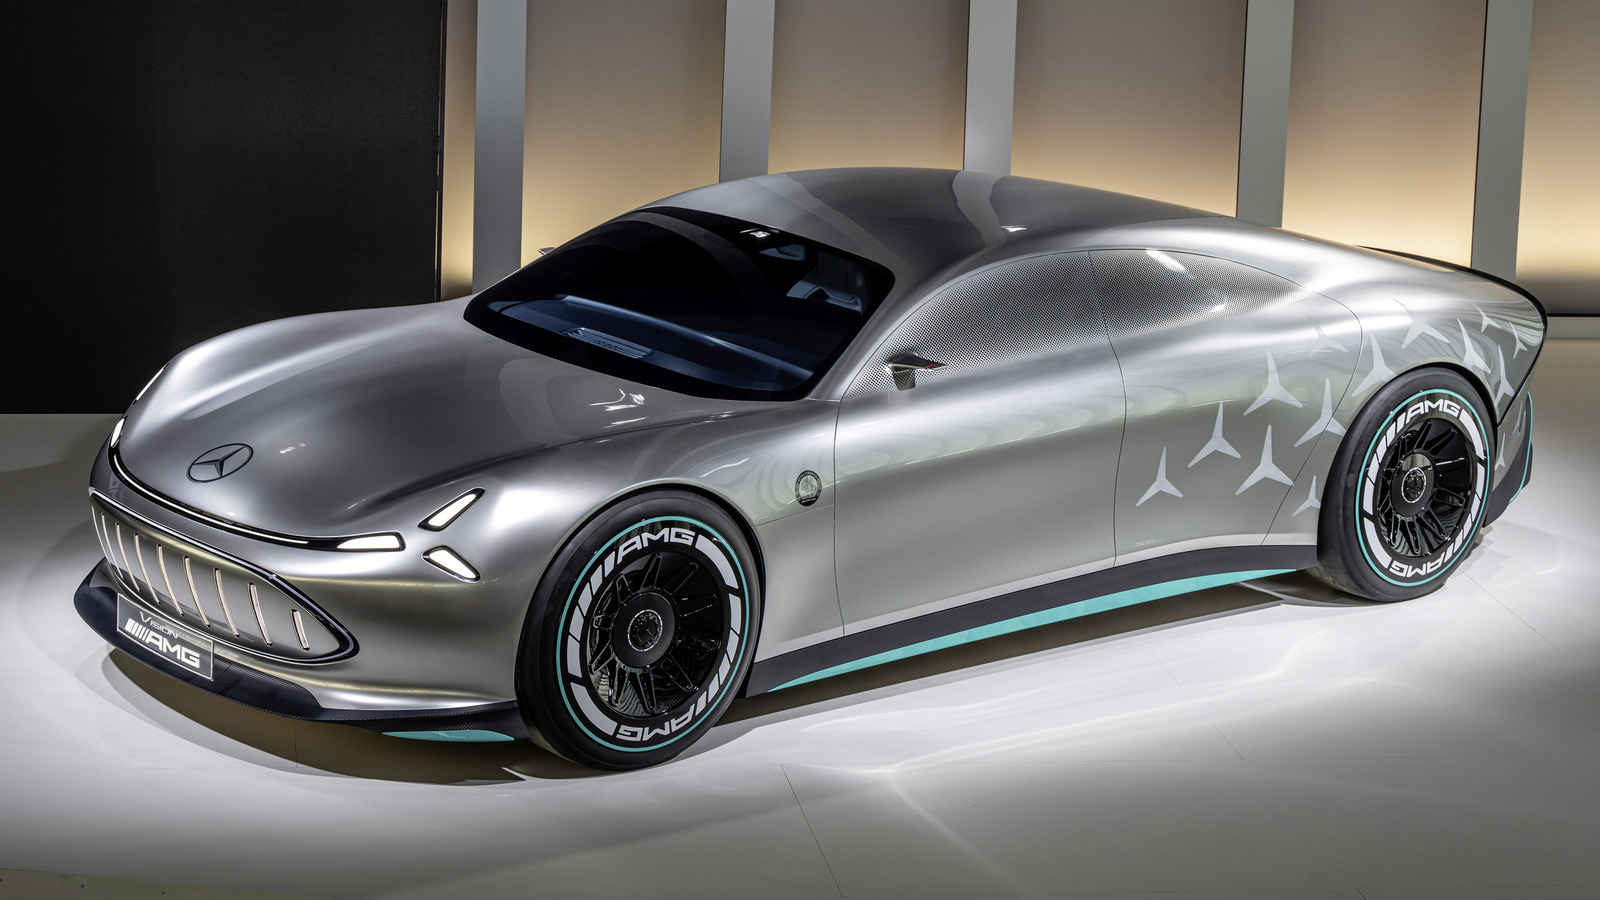 This Astonishing Vision AMG Sports EV Will Somehow Spawn Production Electric Cars